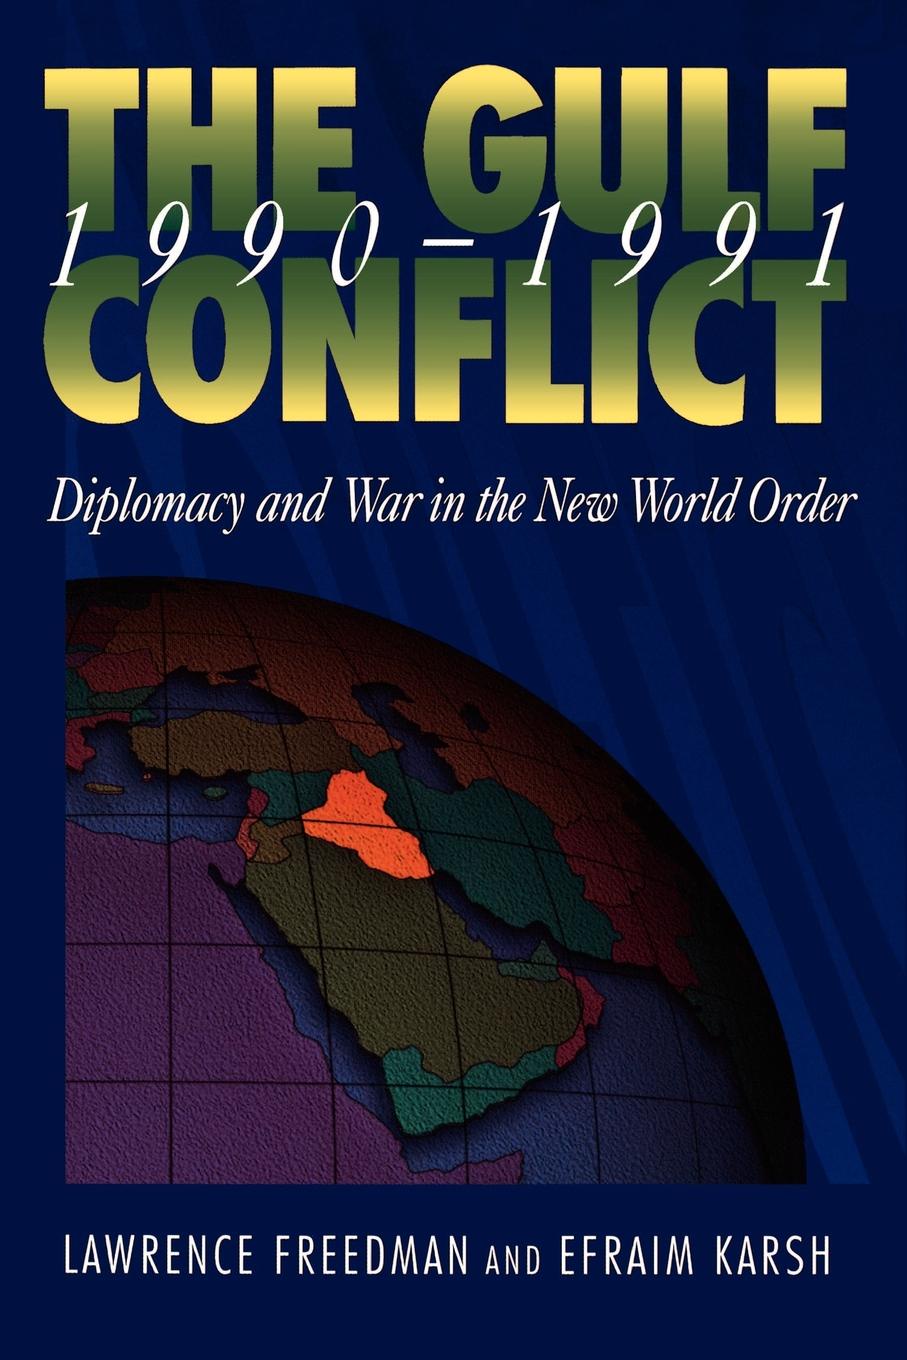 The Gulf Conflict, 1990-1991. Diplomacy and War in the New World Order